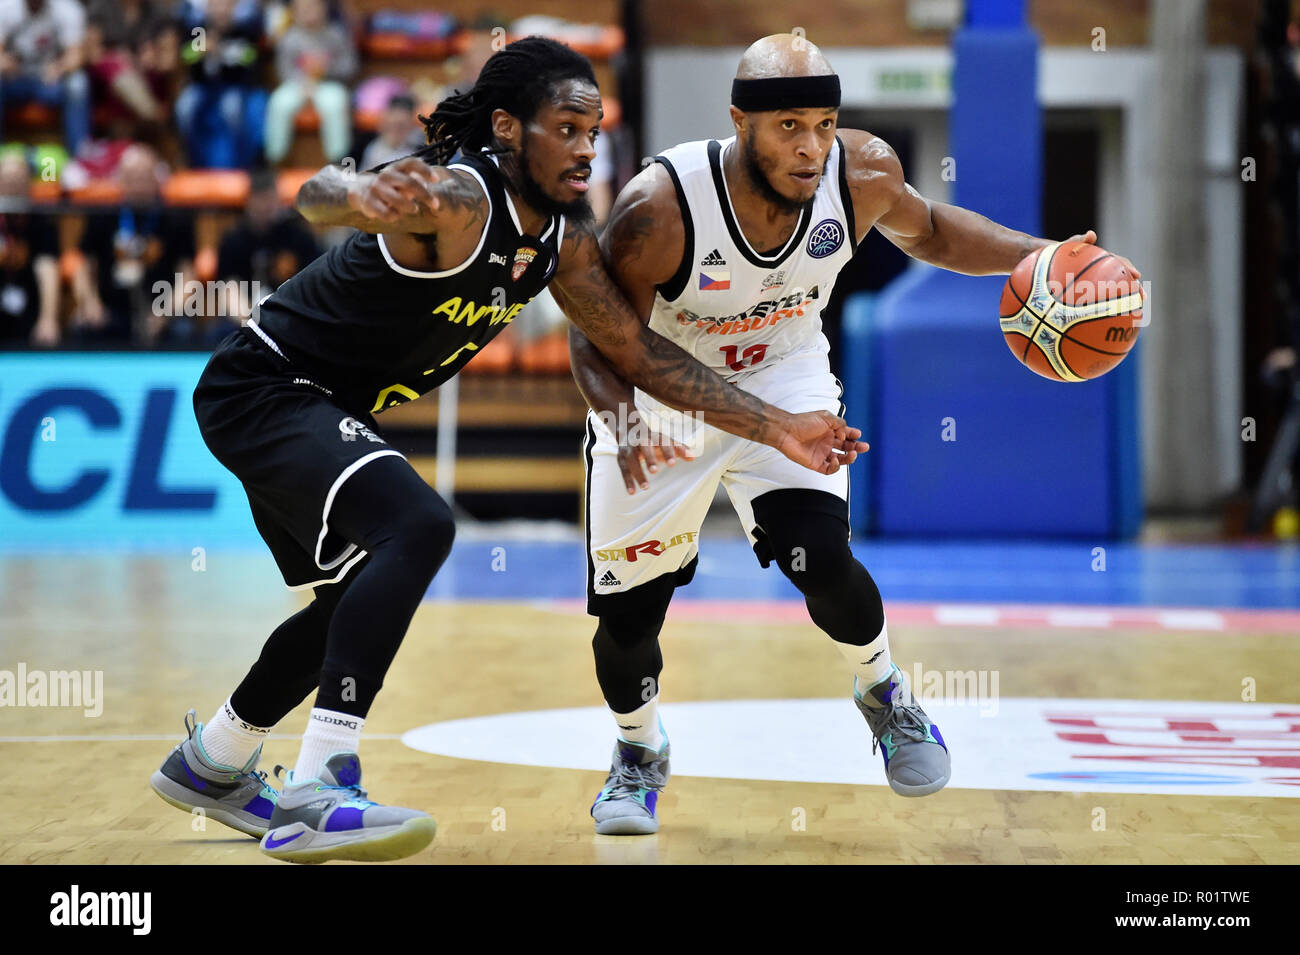 Nymburk, Czech Republic. 31st Oct, 2018. L-R Paris Lee of Antwerp and Eugene Lawence of Nymburk in action in the 4th round men's basketball Champions League match Nymburk vs Antwerp, in Nymburk, Czech Republic, October 31, 2018. Credit: Josef Vostarek/CTK Photo/Alamy Live News Stock Photo